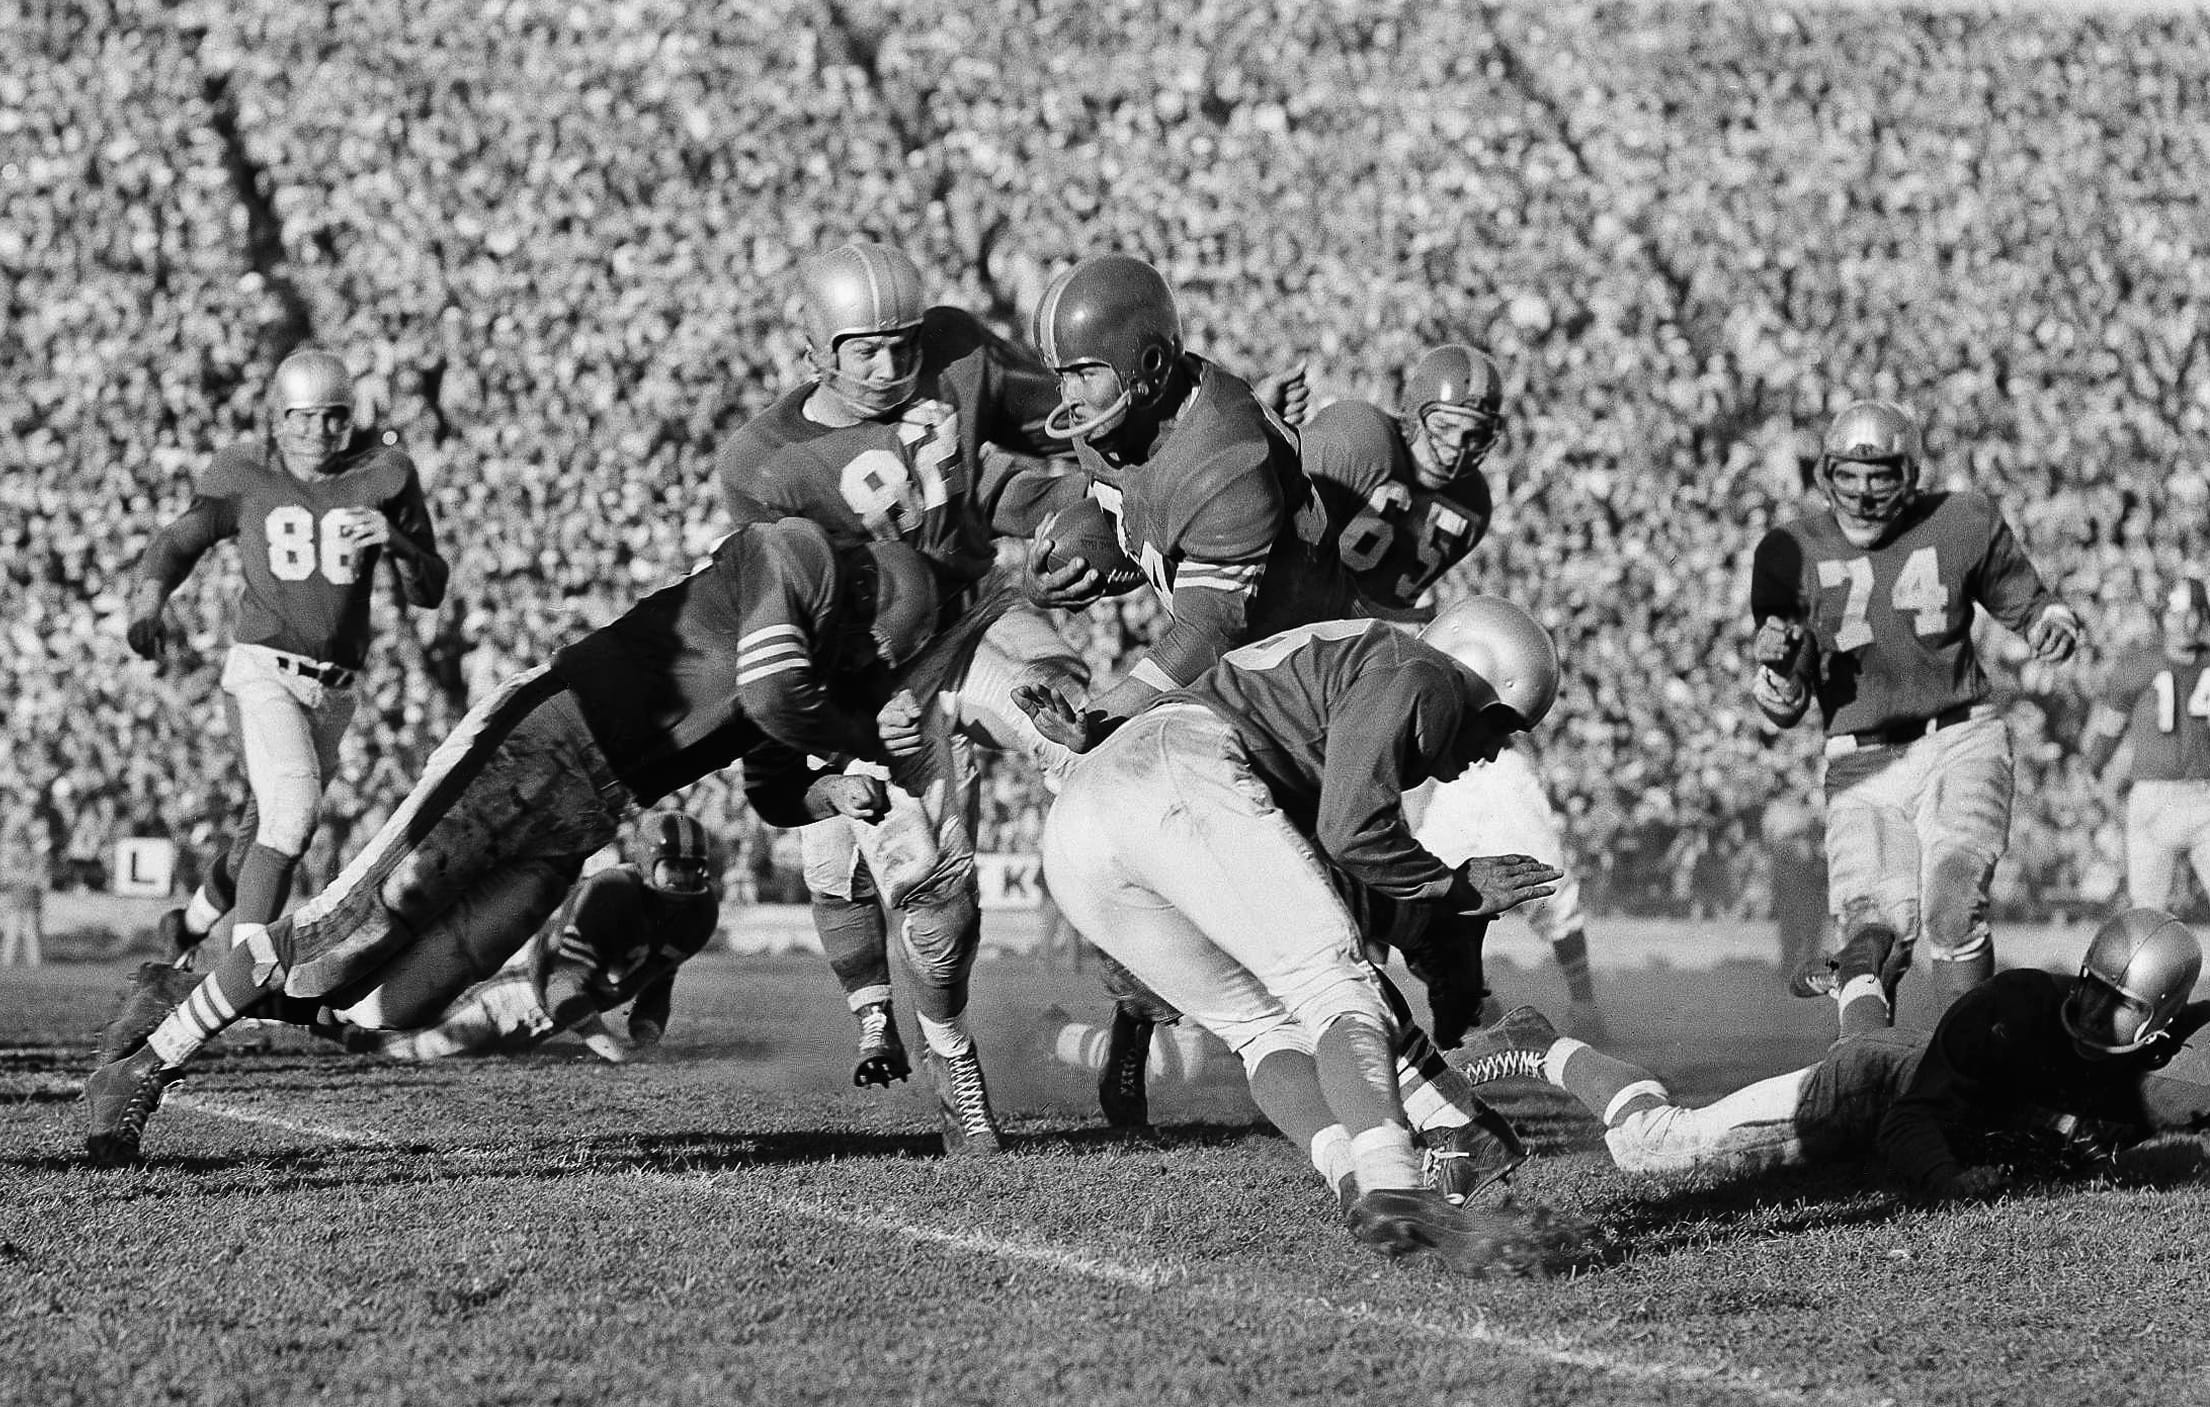 San Francisco 49ers fullback Joe Perry carries the ball against the Detroit Lions.